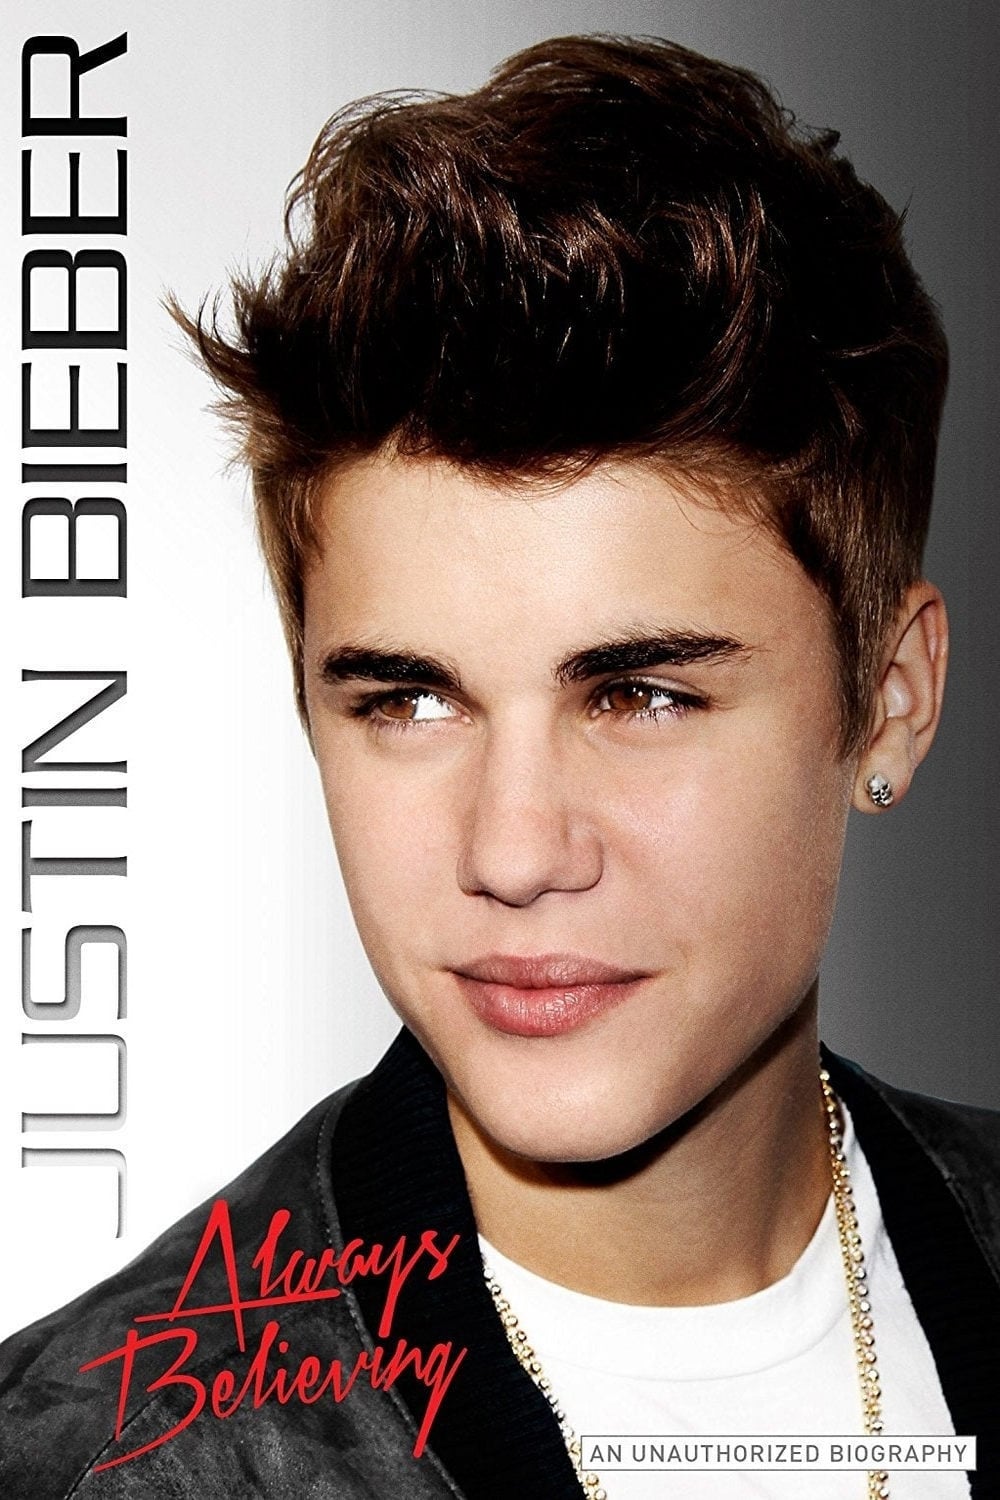 Justin Bieber: Always Believing on FREECABLE TV